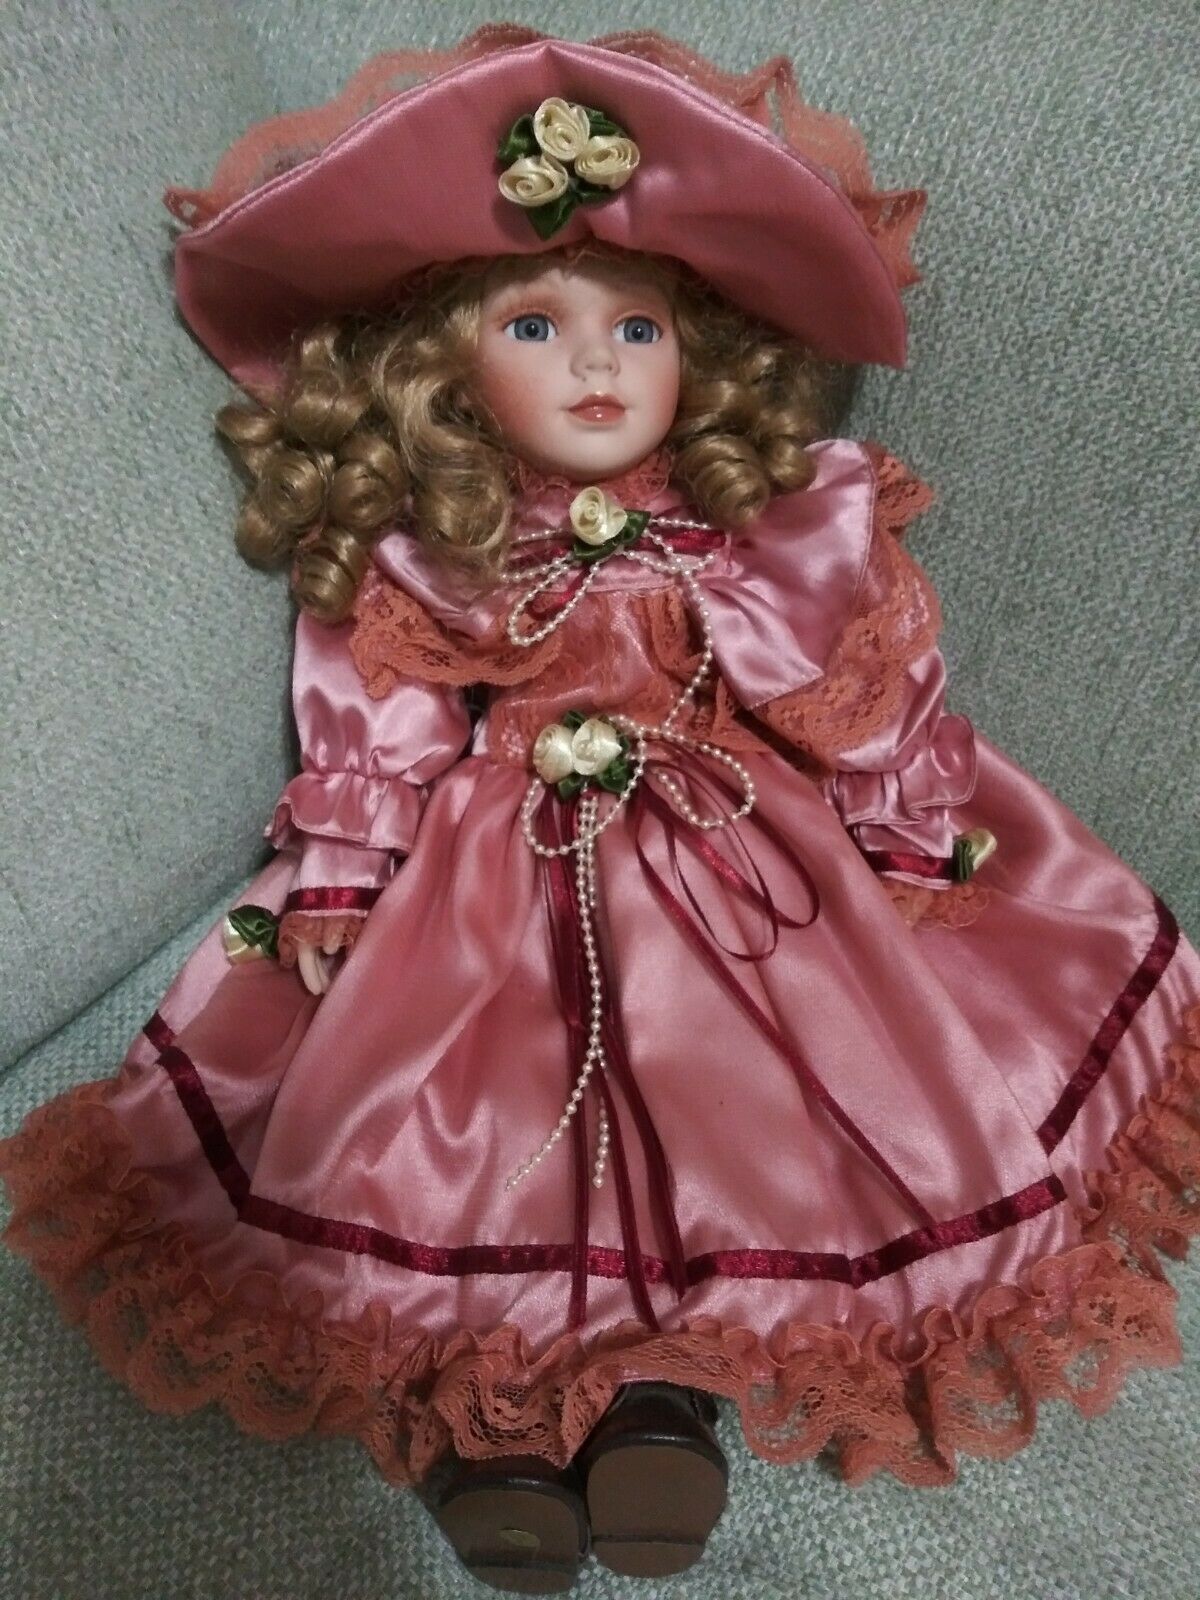 Lee Madison Porcelain Limited Edition Of 90/4950 Doll 18".